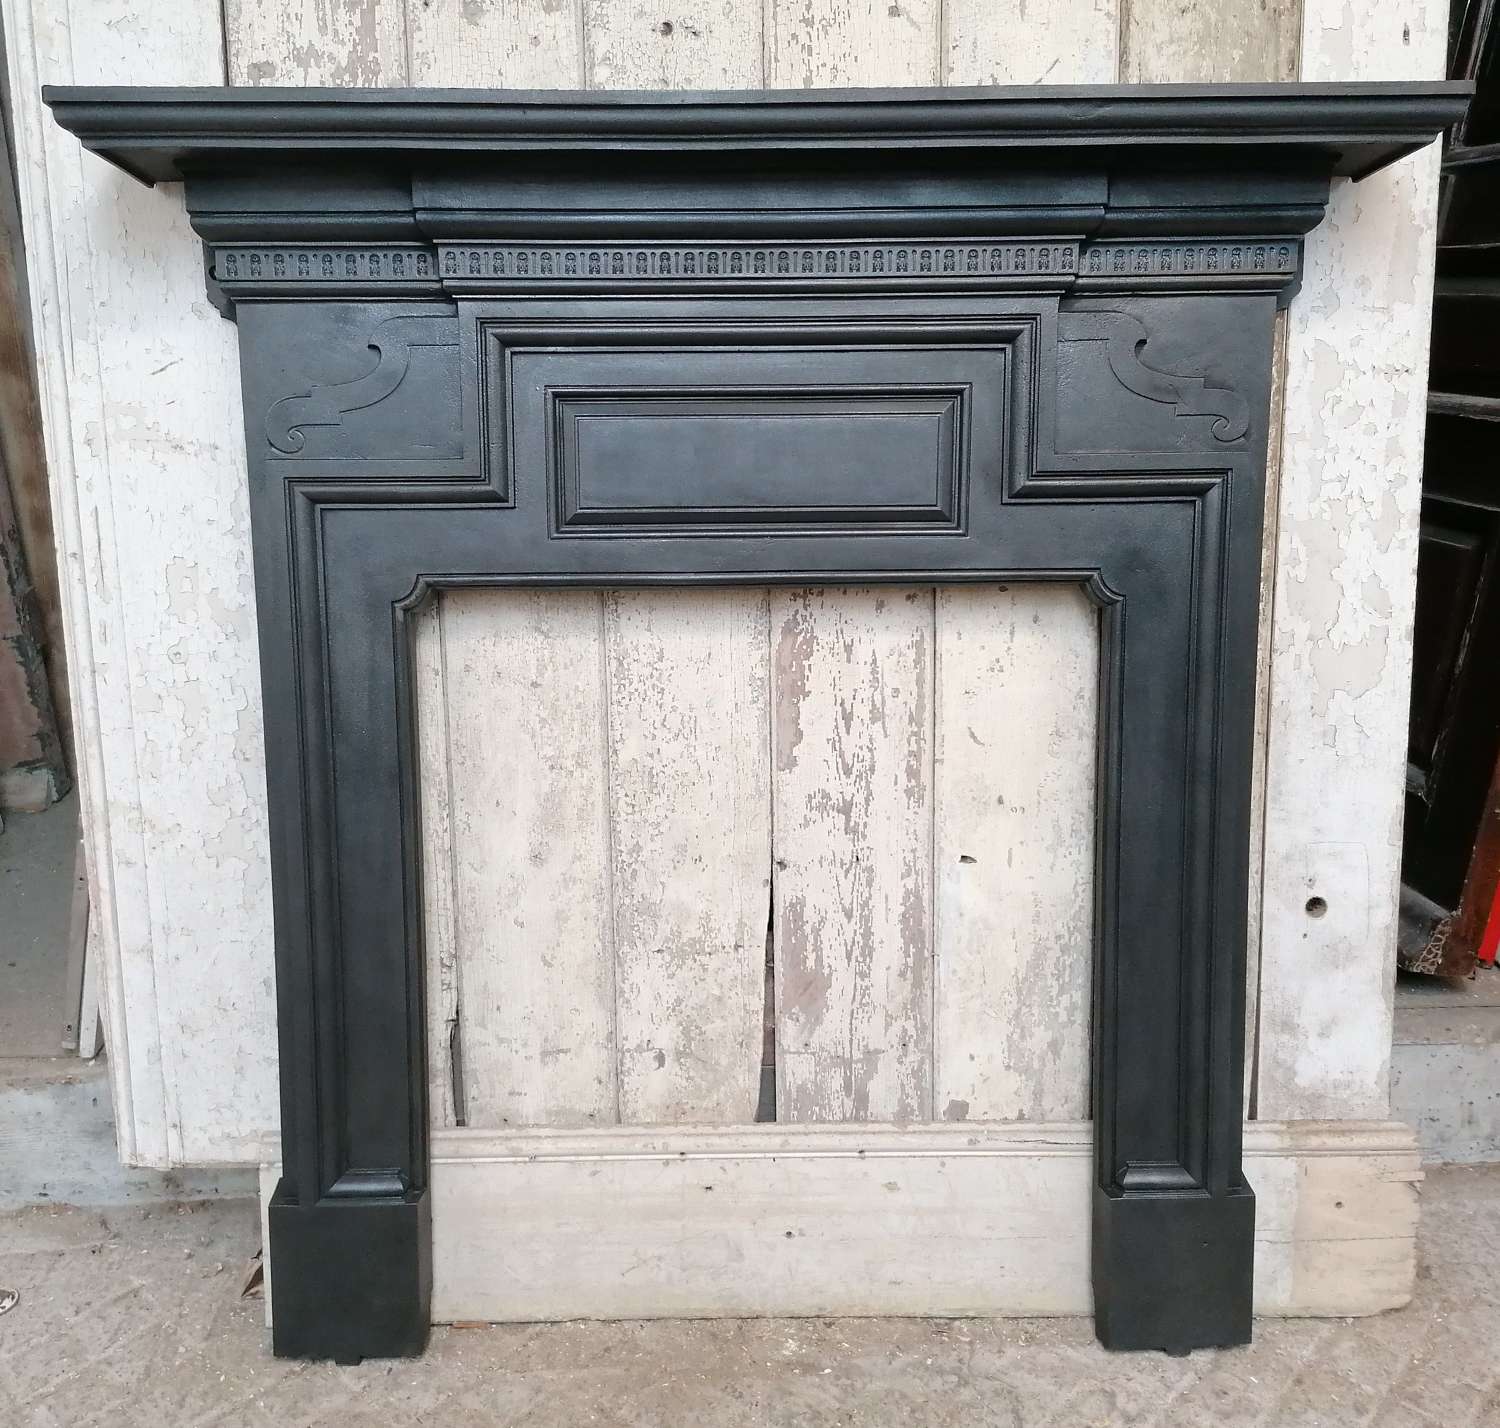 FS0155 A GEORGIAN STYLE CAST IRON FIRE SURROUND FOR WOOD BURNER C.1900